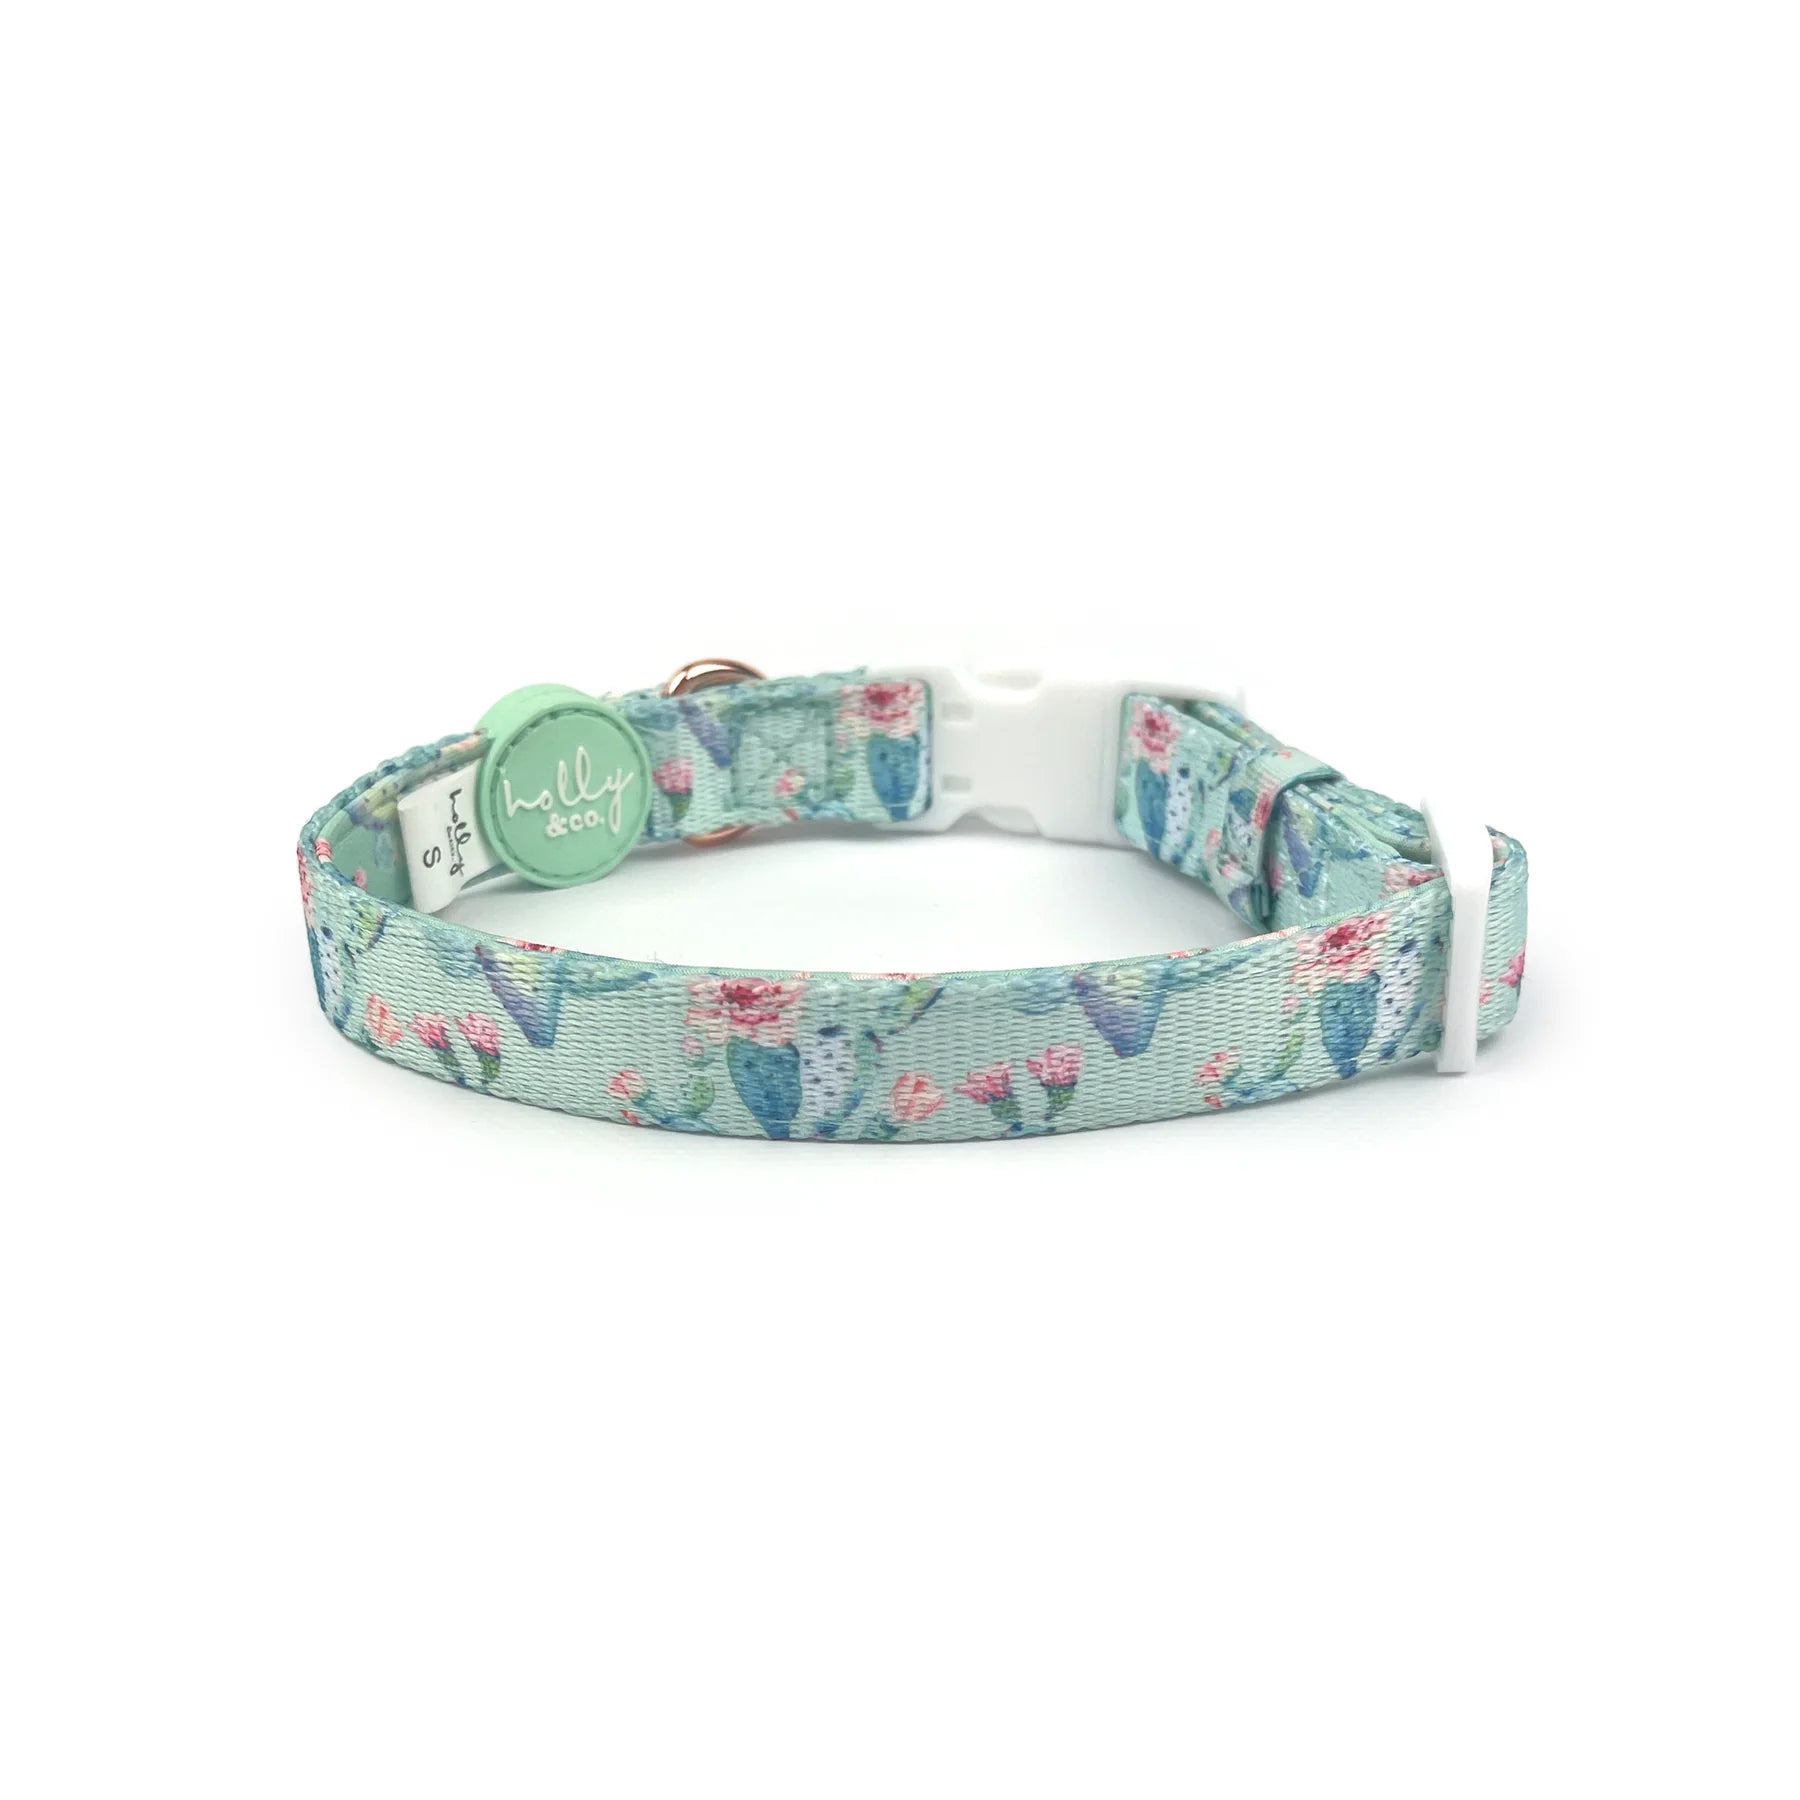 Collar | Pretty Fly For A Cacti